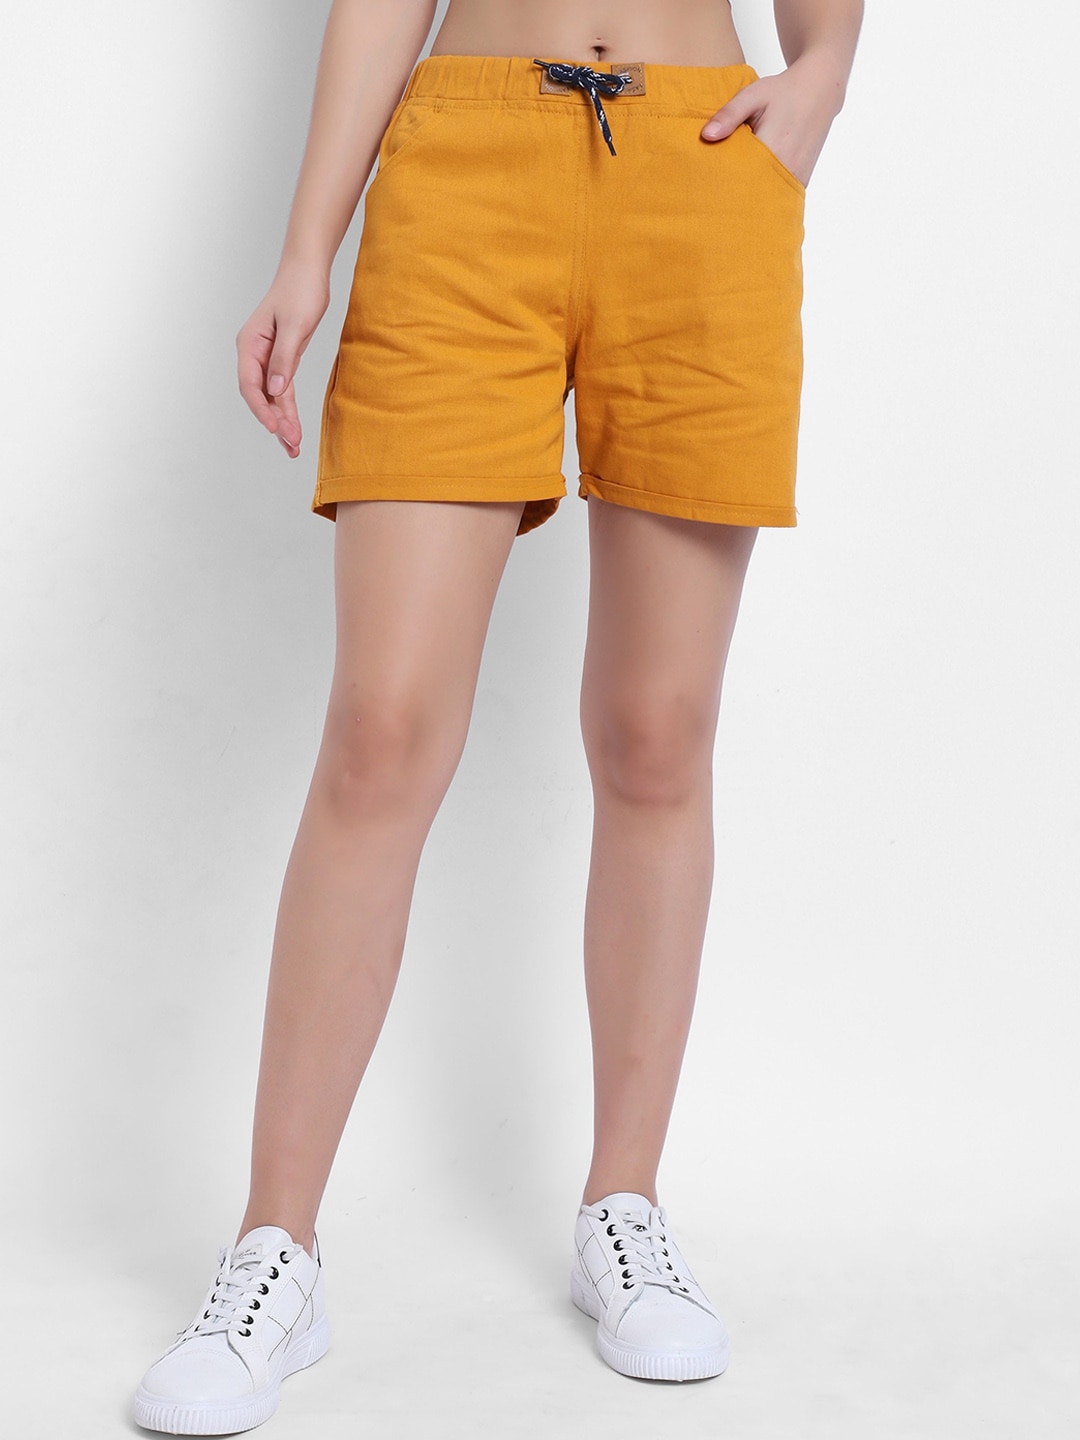 MAZIE Women Mid-Rise Skinny Fit Cotton Shorts Price in India